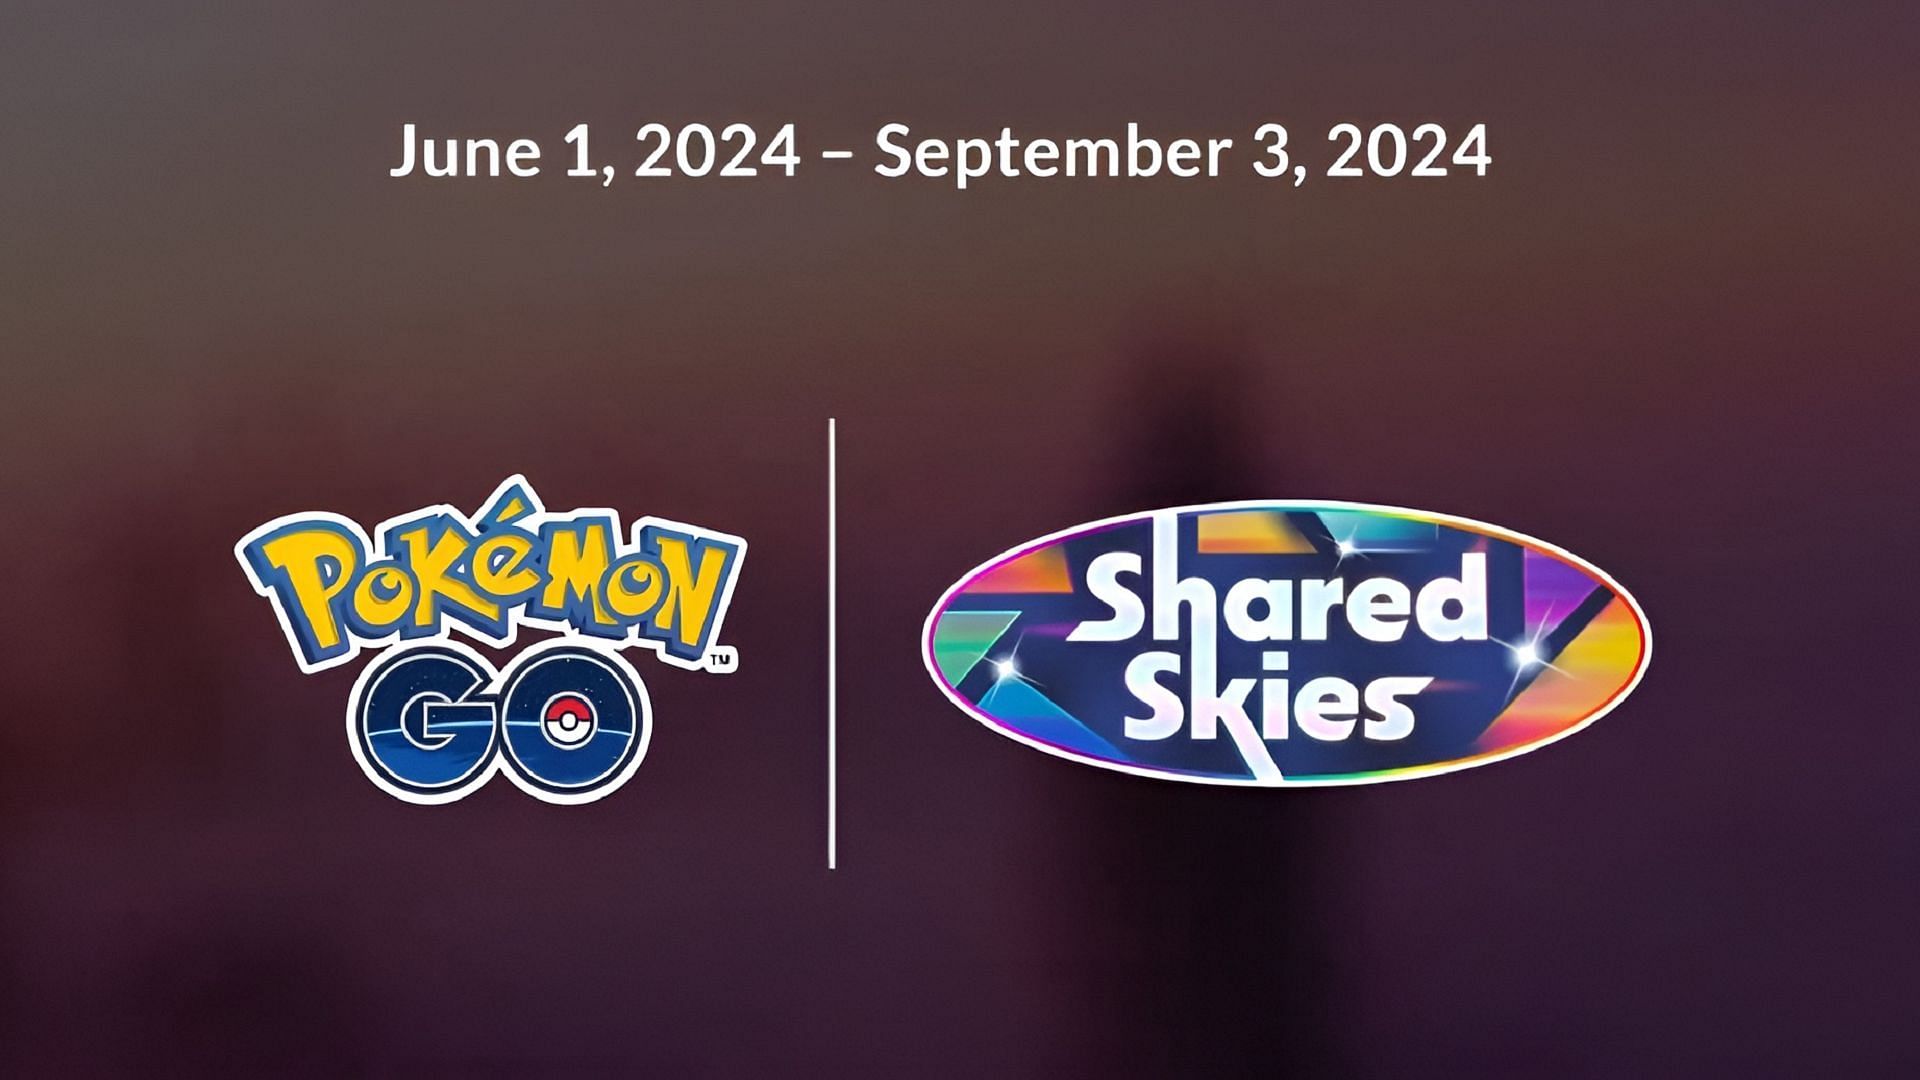 5 unlikely things we would love to see in Pokemon GO Shared Skies